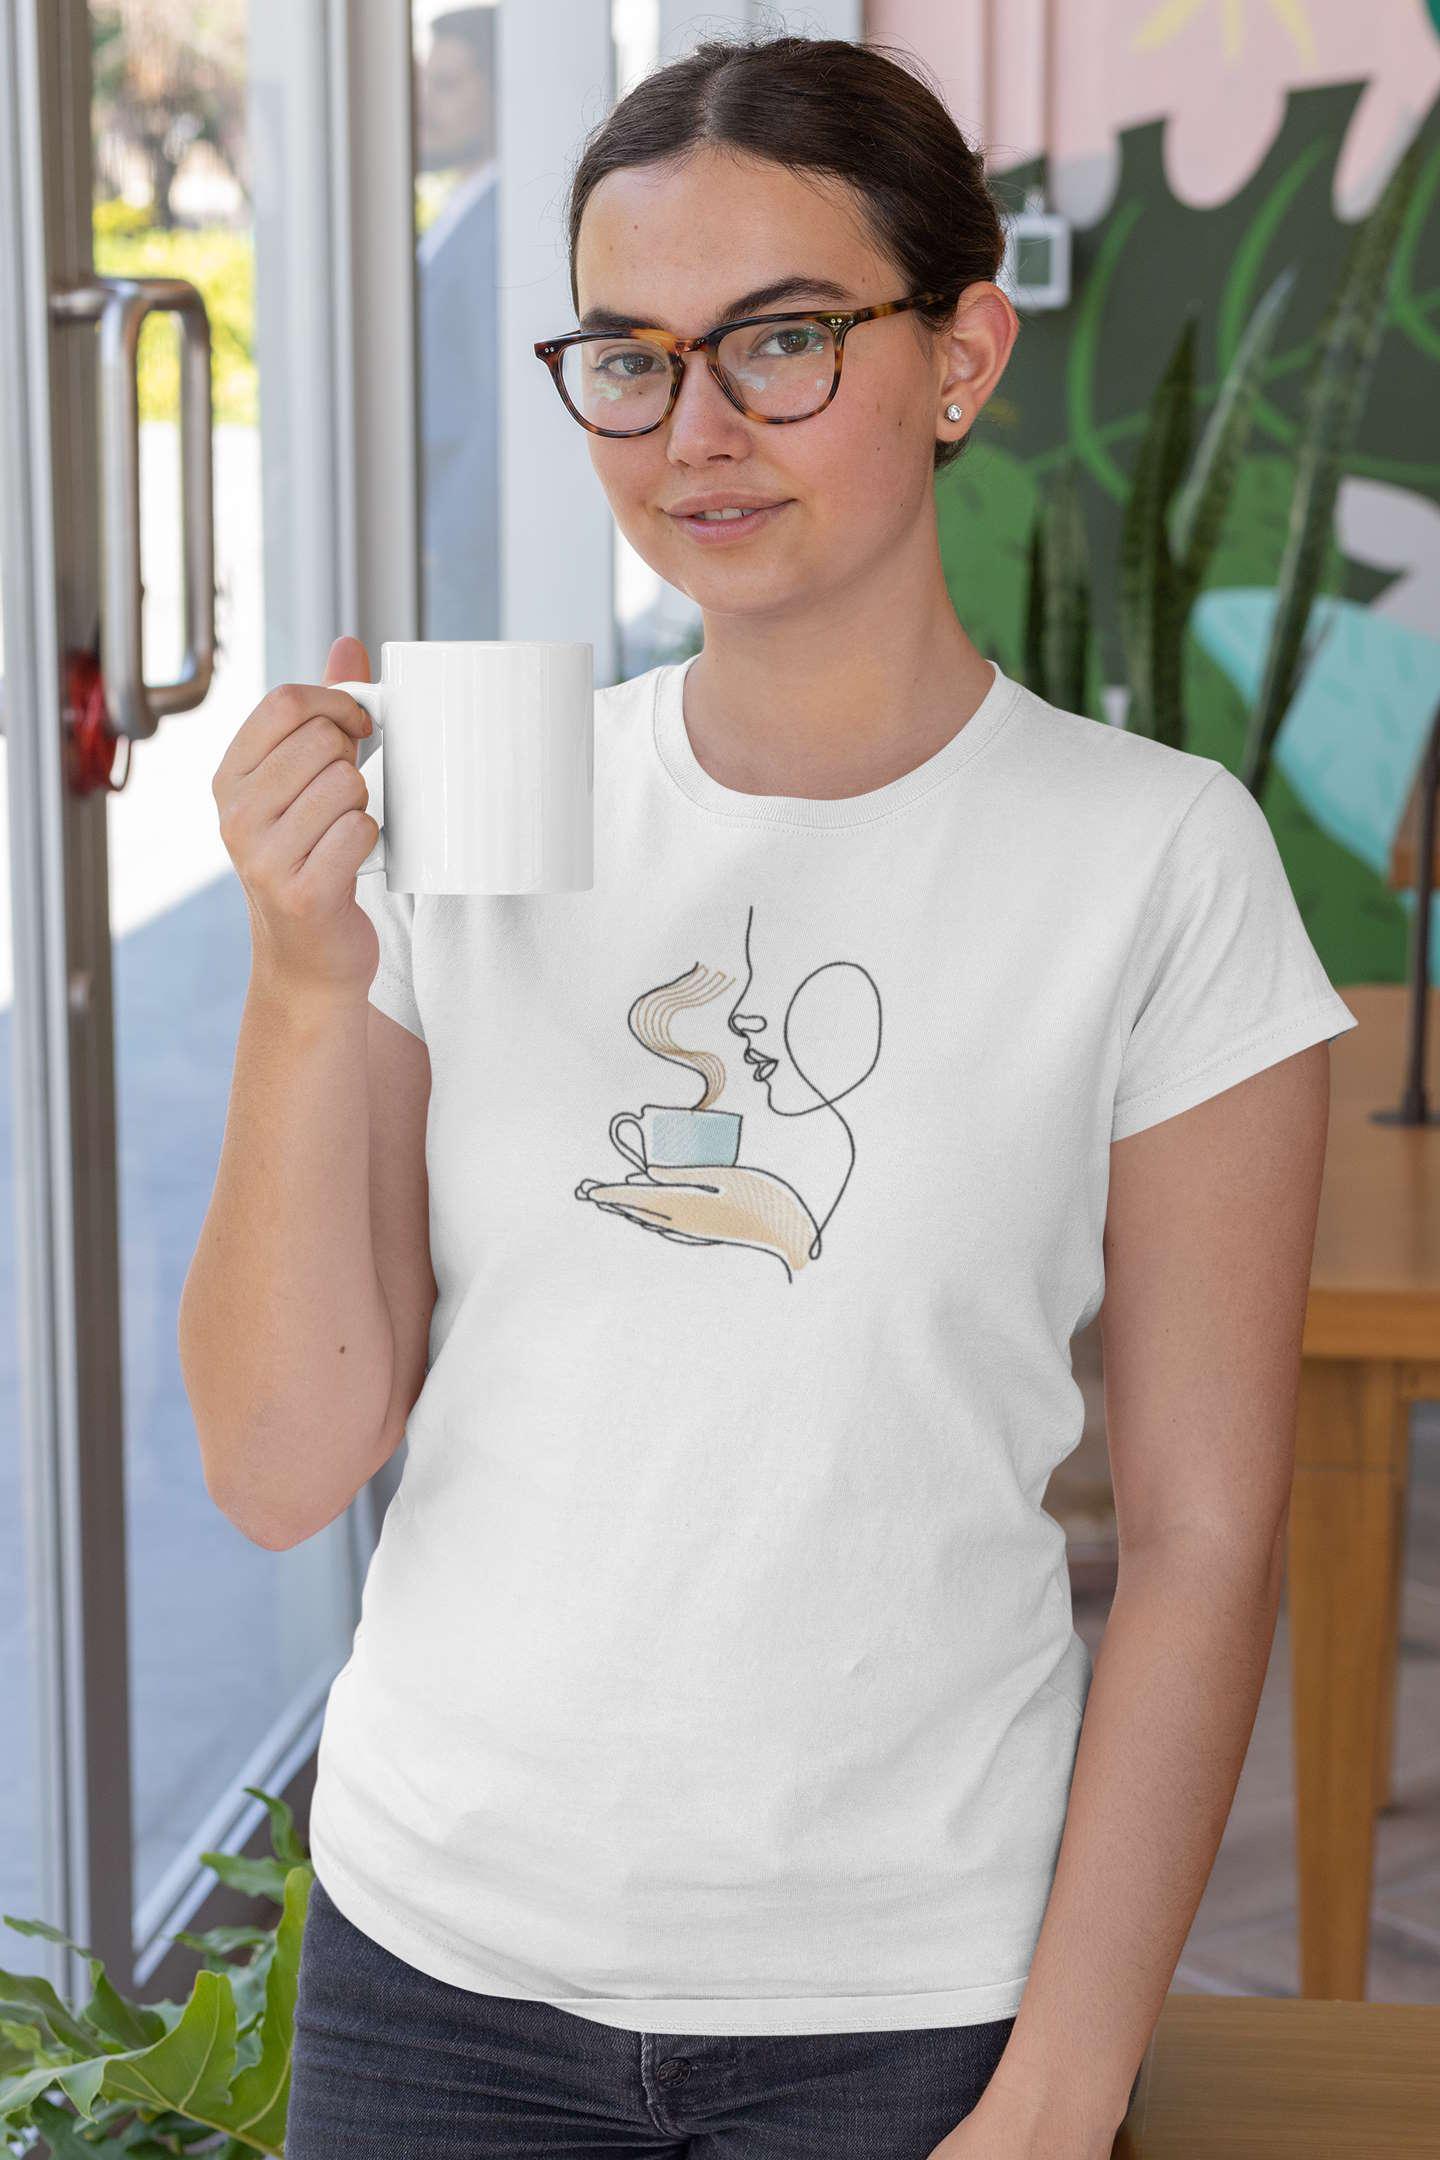 My Morning Coffee Free Embroidery Design on a Women's T-shirt